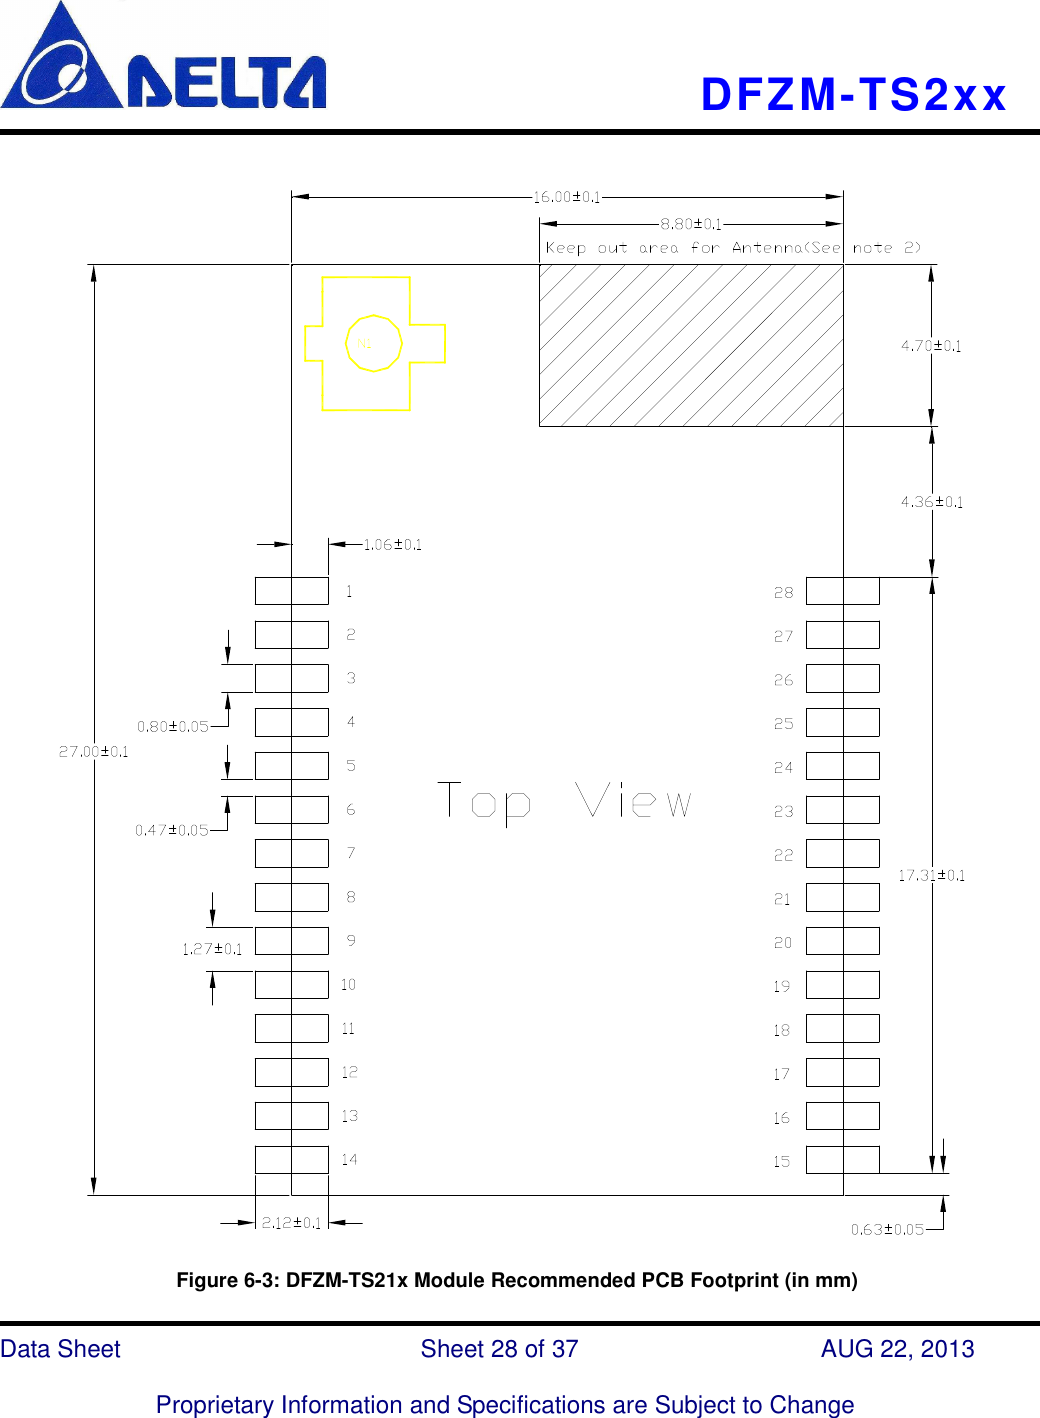    DFZM-TS2xx   Data Sheet                              Sheet 28 of 37                    AUG 22, 2013  Proprietary Information and Specifications are Subject to Change                         Figure 6-3: DFZM-TS21x Module Recommended PCB Footprint (in mm) 